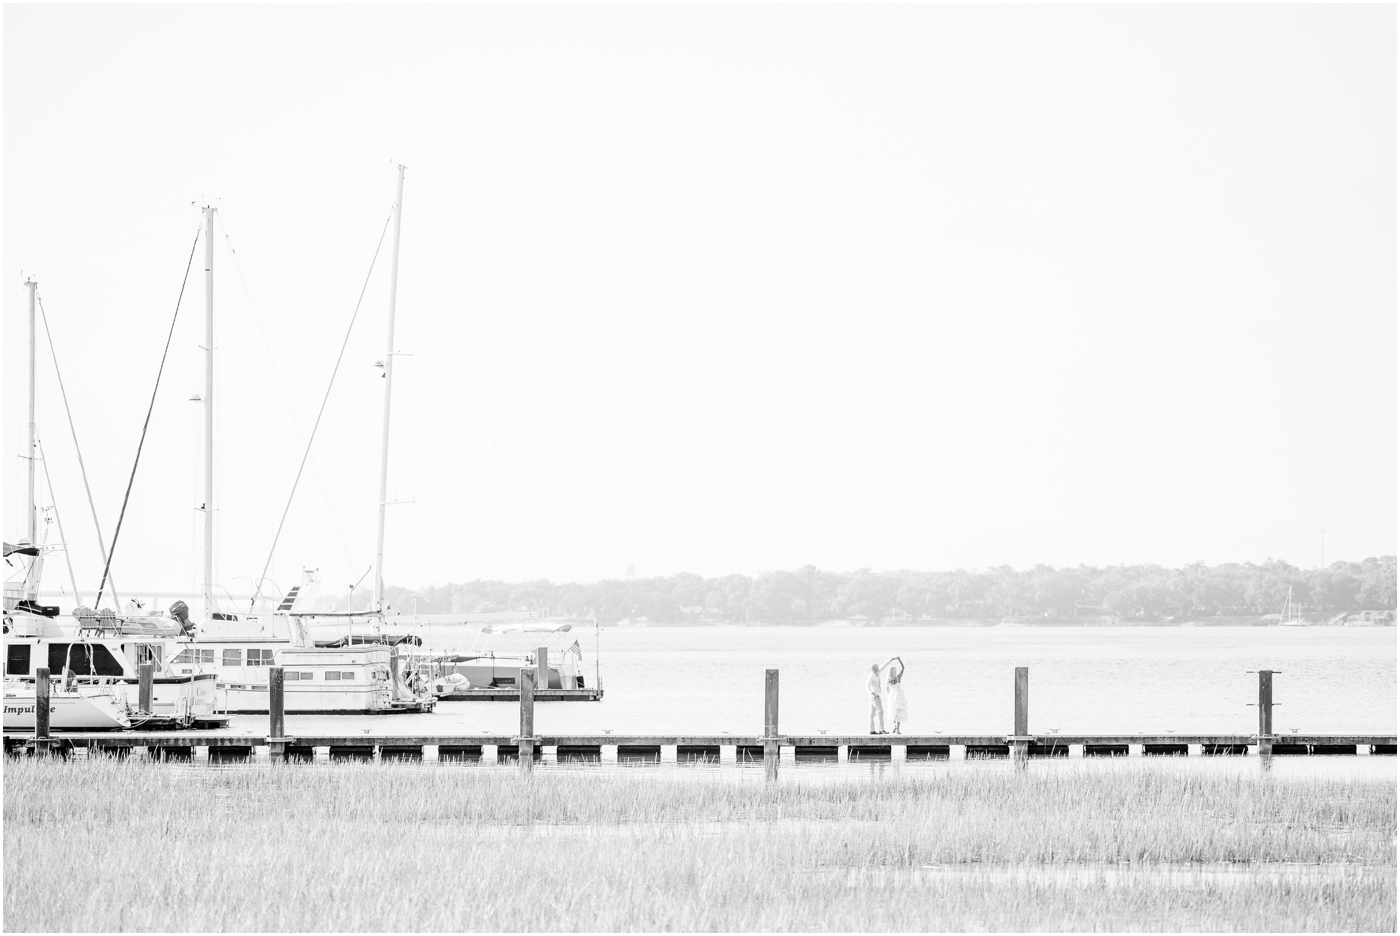 Bay Street Engagement Session in Beaufort, SC